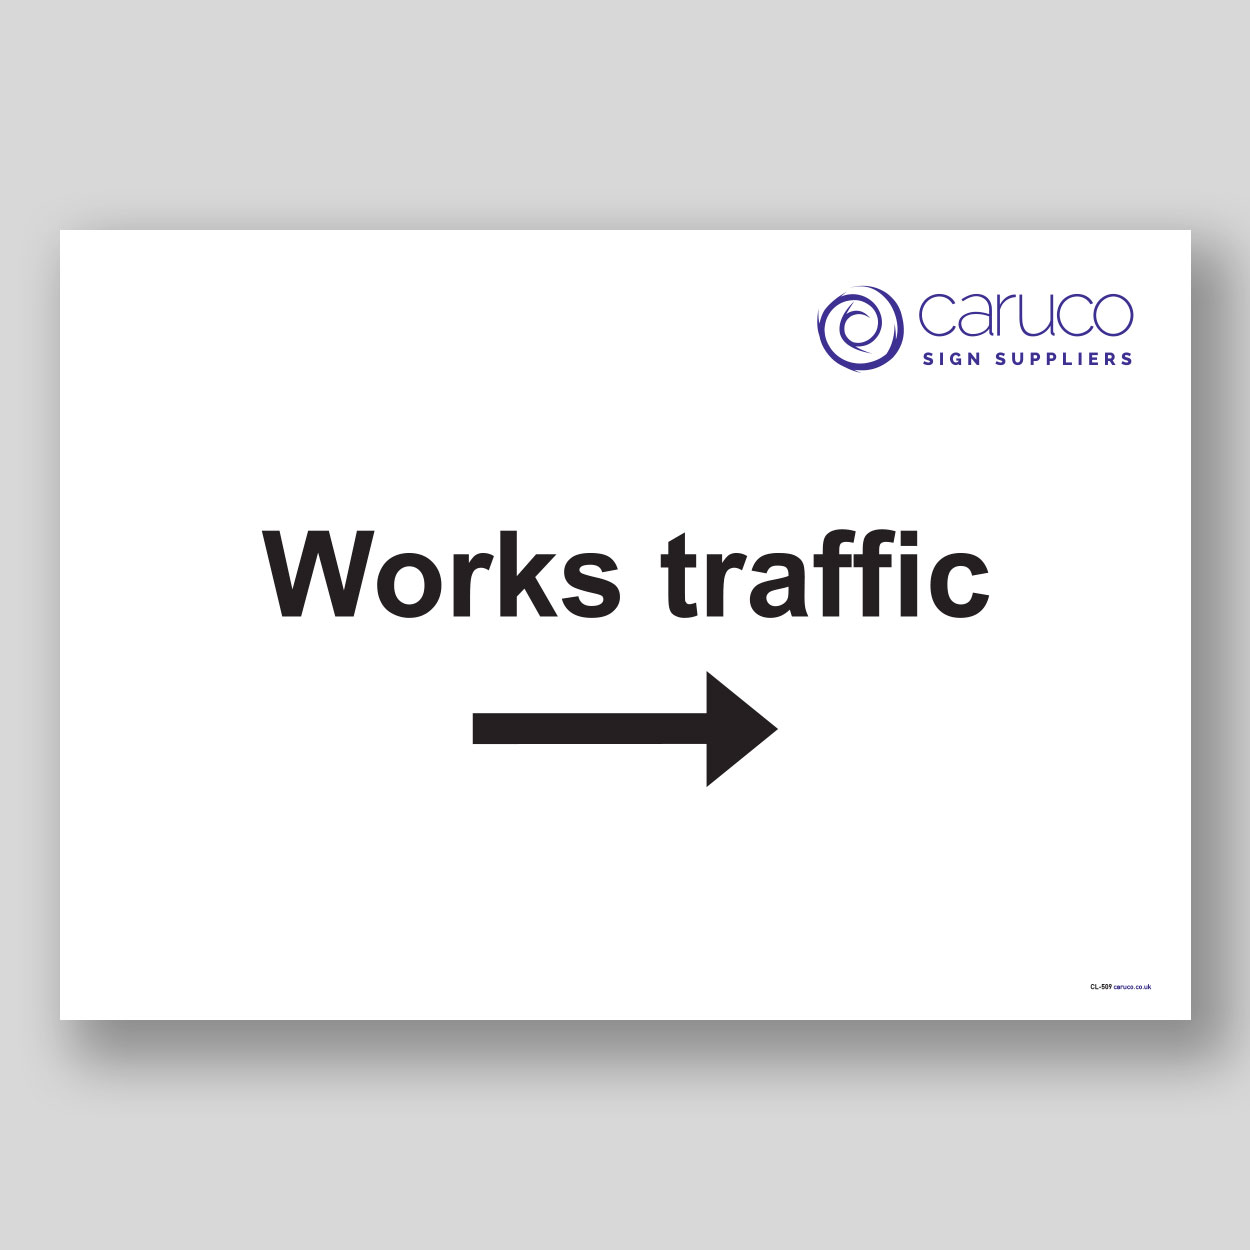 CL-509 Works traffic - right arrow